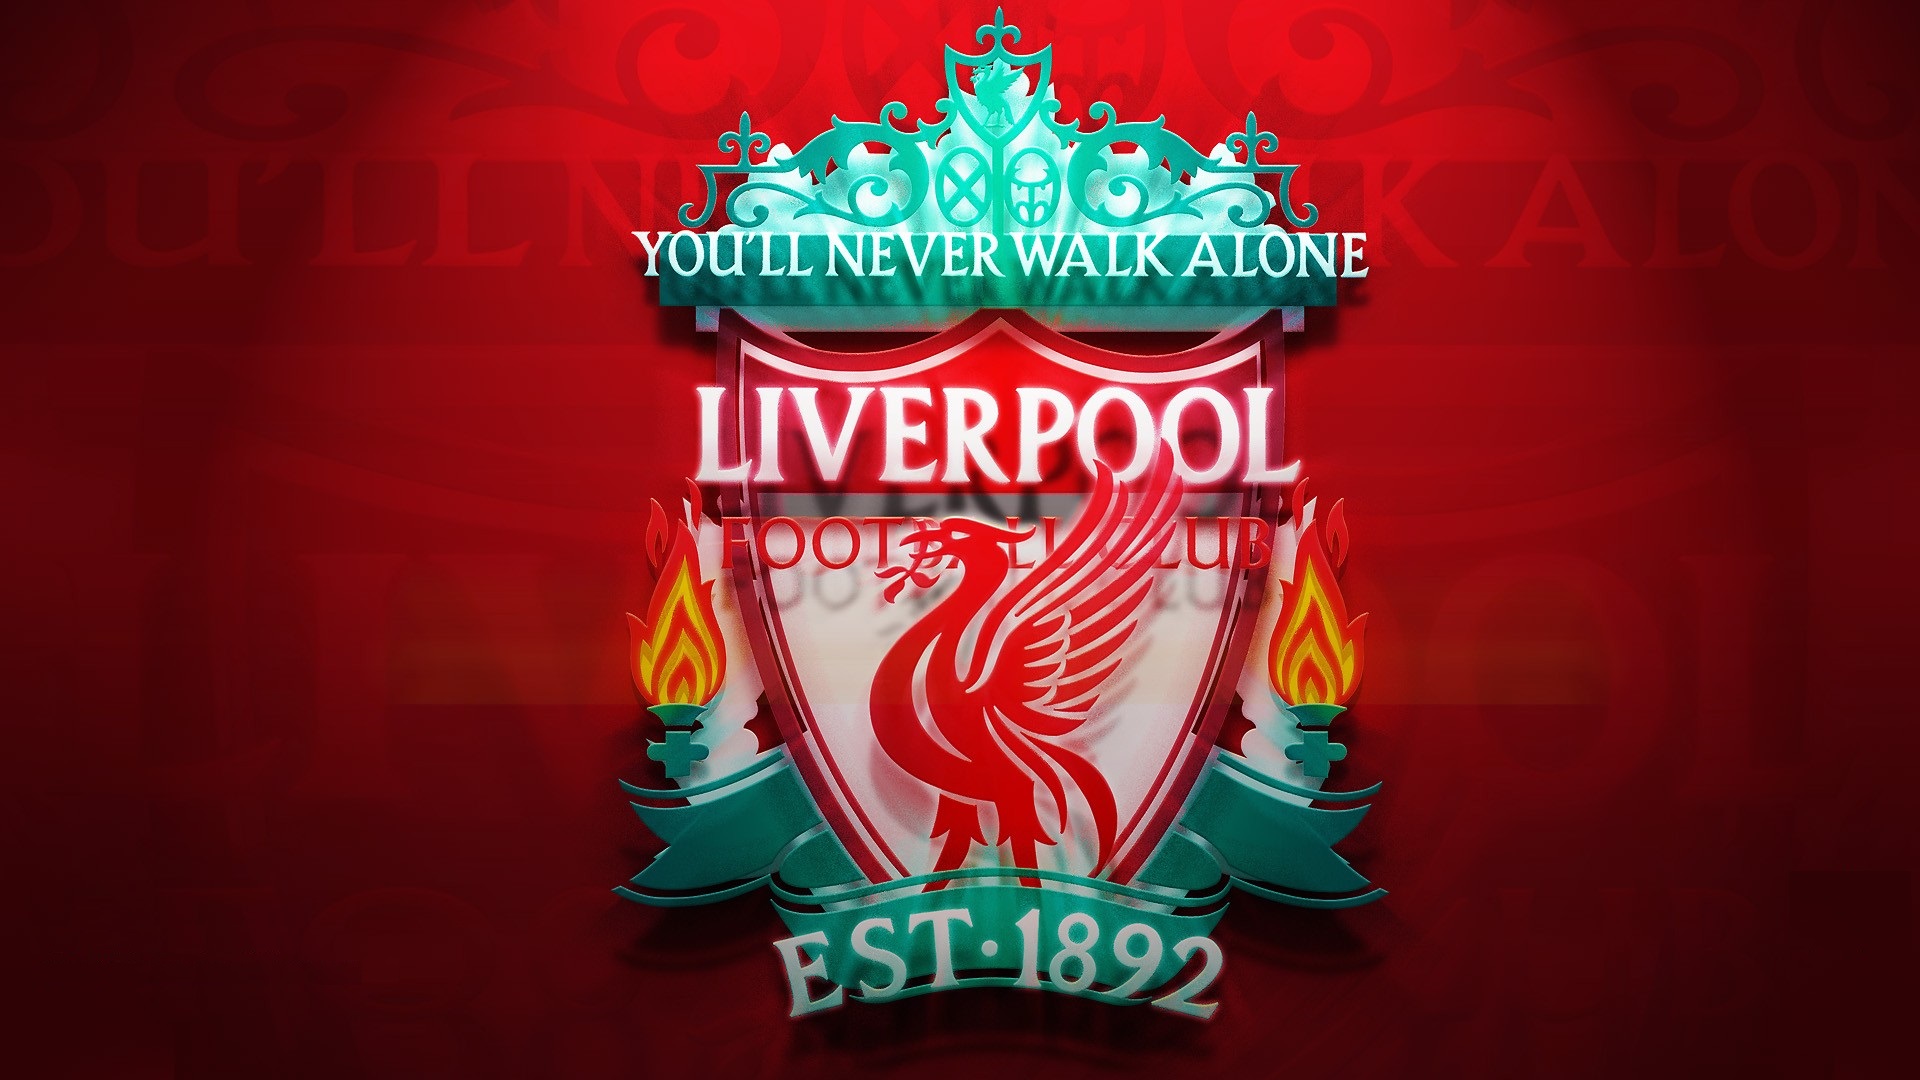 Wallpapers HD Liverpool With Resolution 1920X1080 pixel. You can make this wallpaper for your Mac or Windows Desktop Background, iPhone, Android or Tablet and another Smartphone device for free